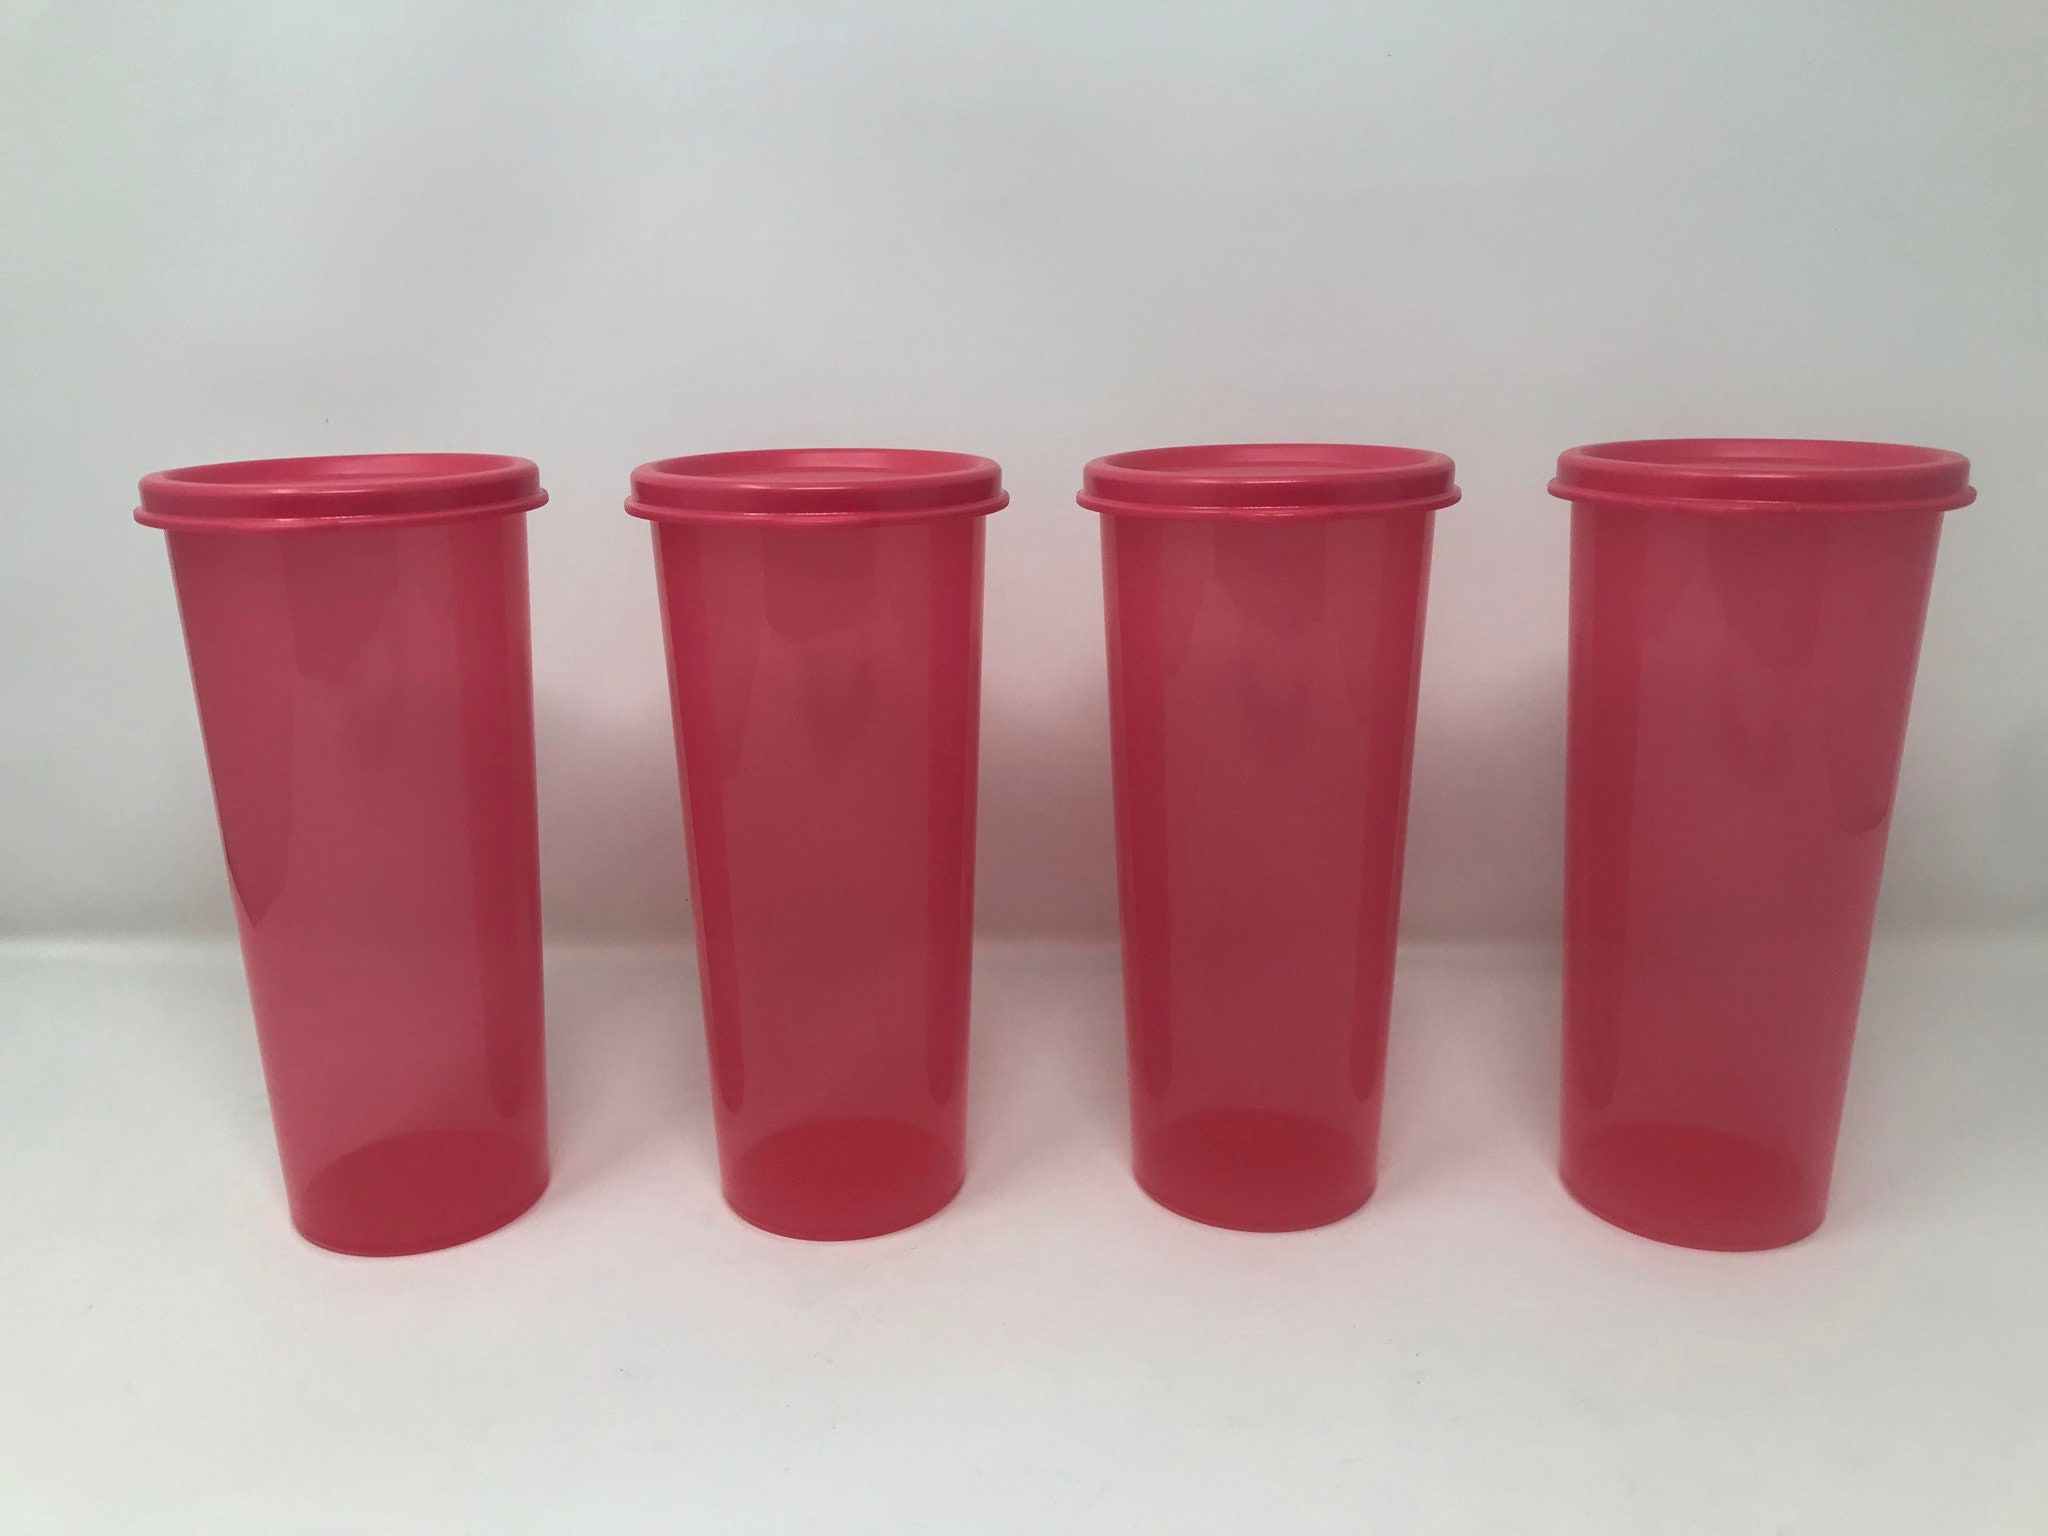 New Vintage Style TUPPERWARE TUMBLERS with Seals 16oz Set